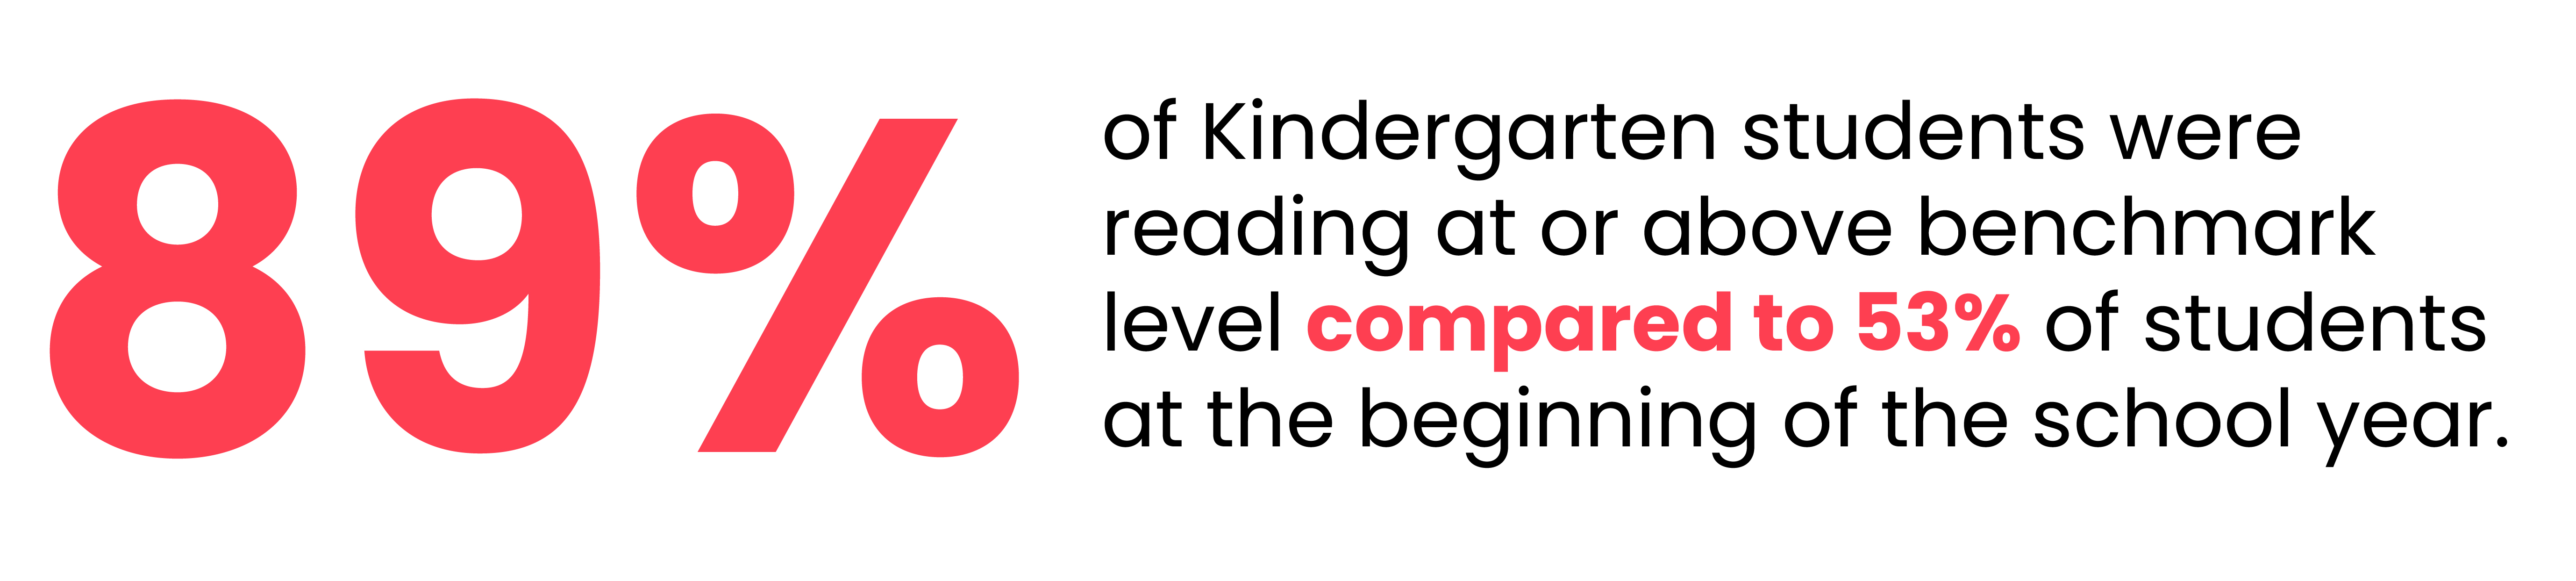 89% of Kindergarten students were reading at or above benchmark level compared to 53% of students at the beginning of the school year